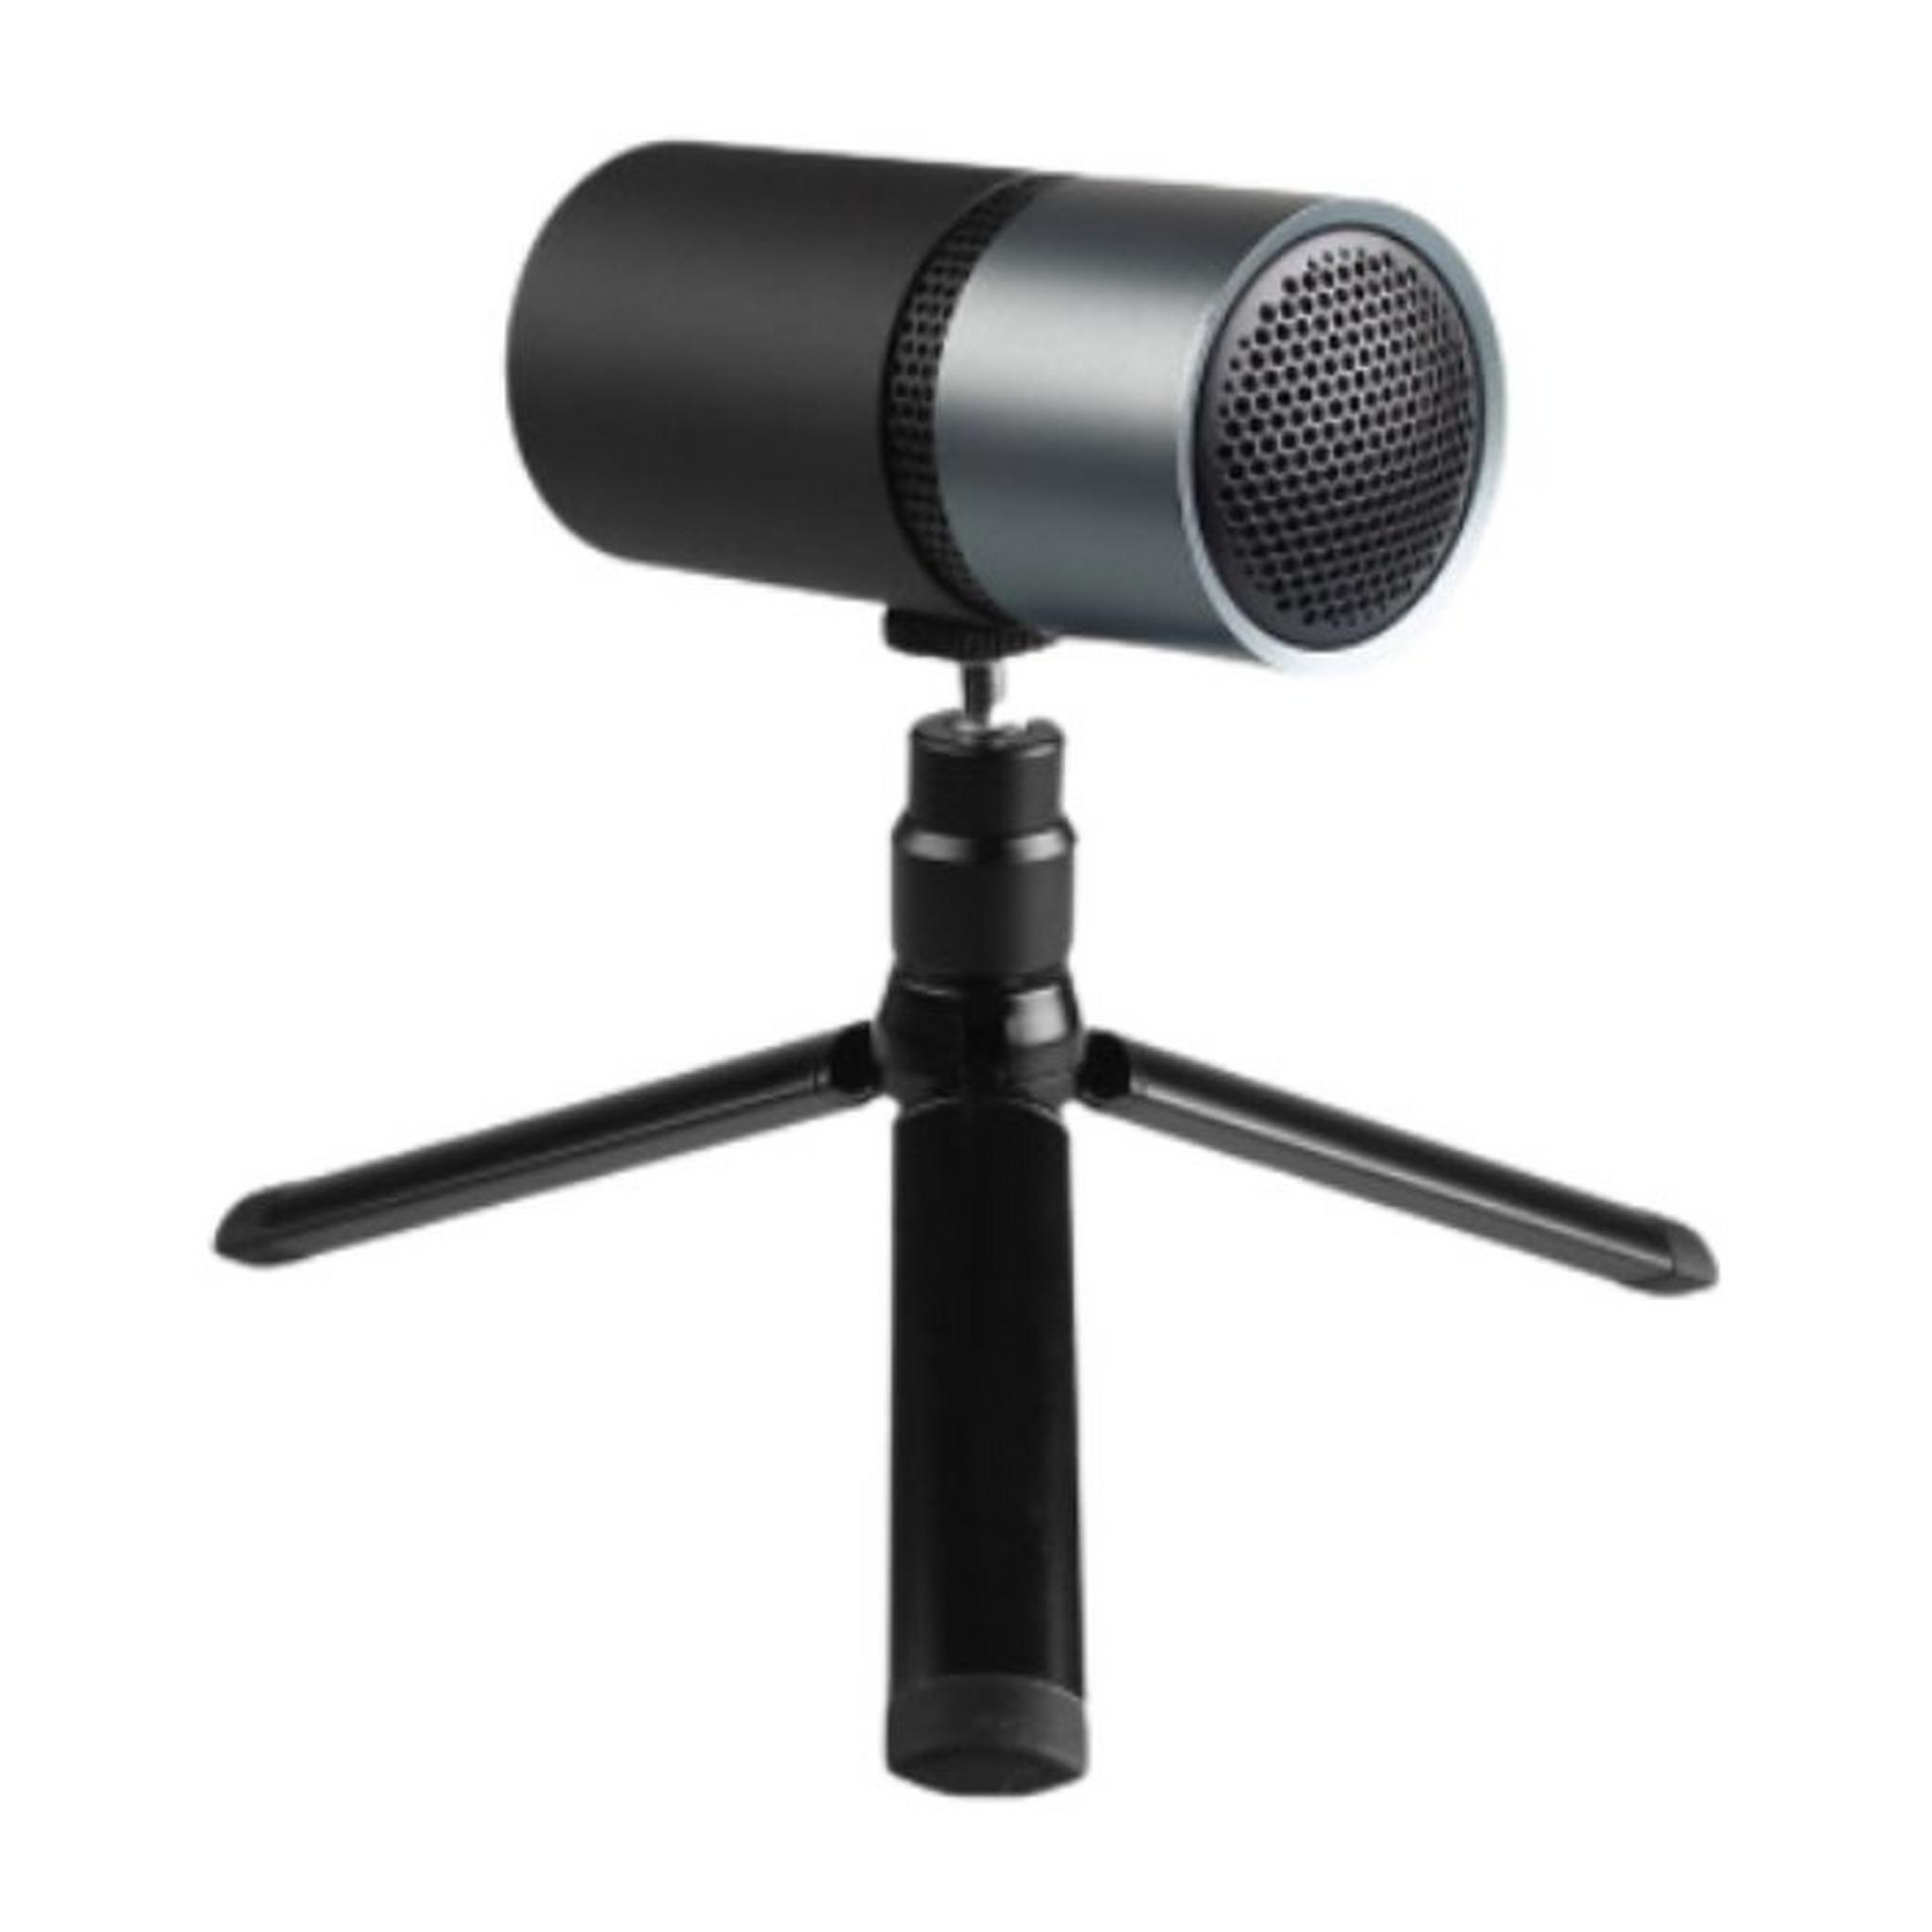 Thronmax MDrill Pulse USB Streaming Microphone